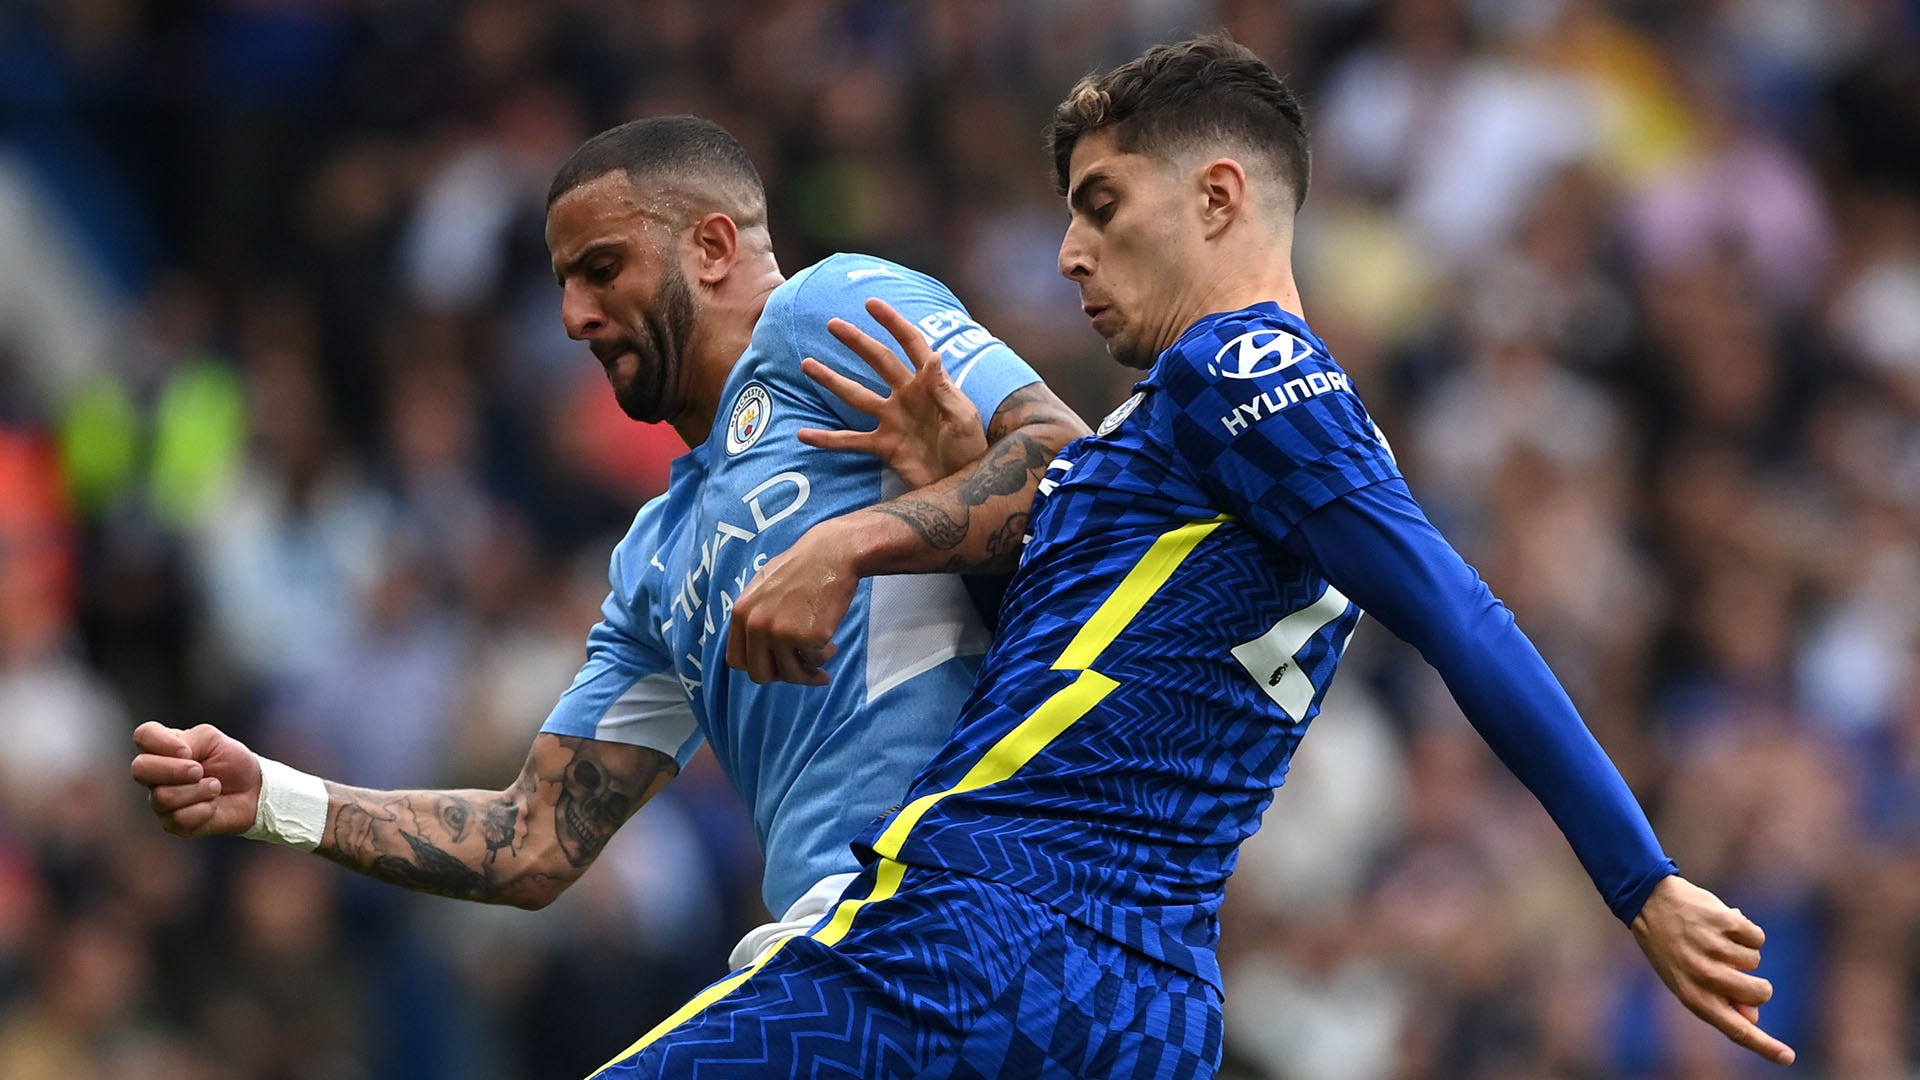 Kyle Walker of Manchester City is tackled by Kai Havertz of Chelsea